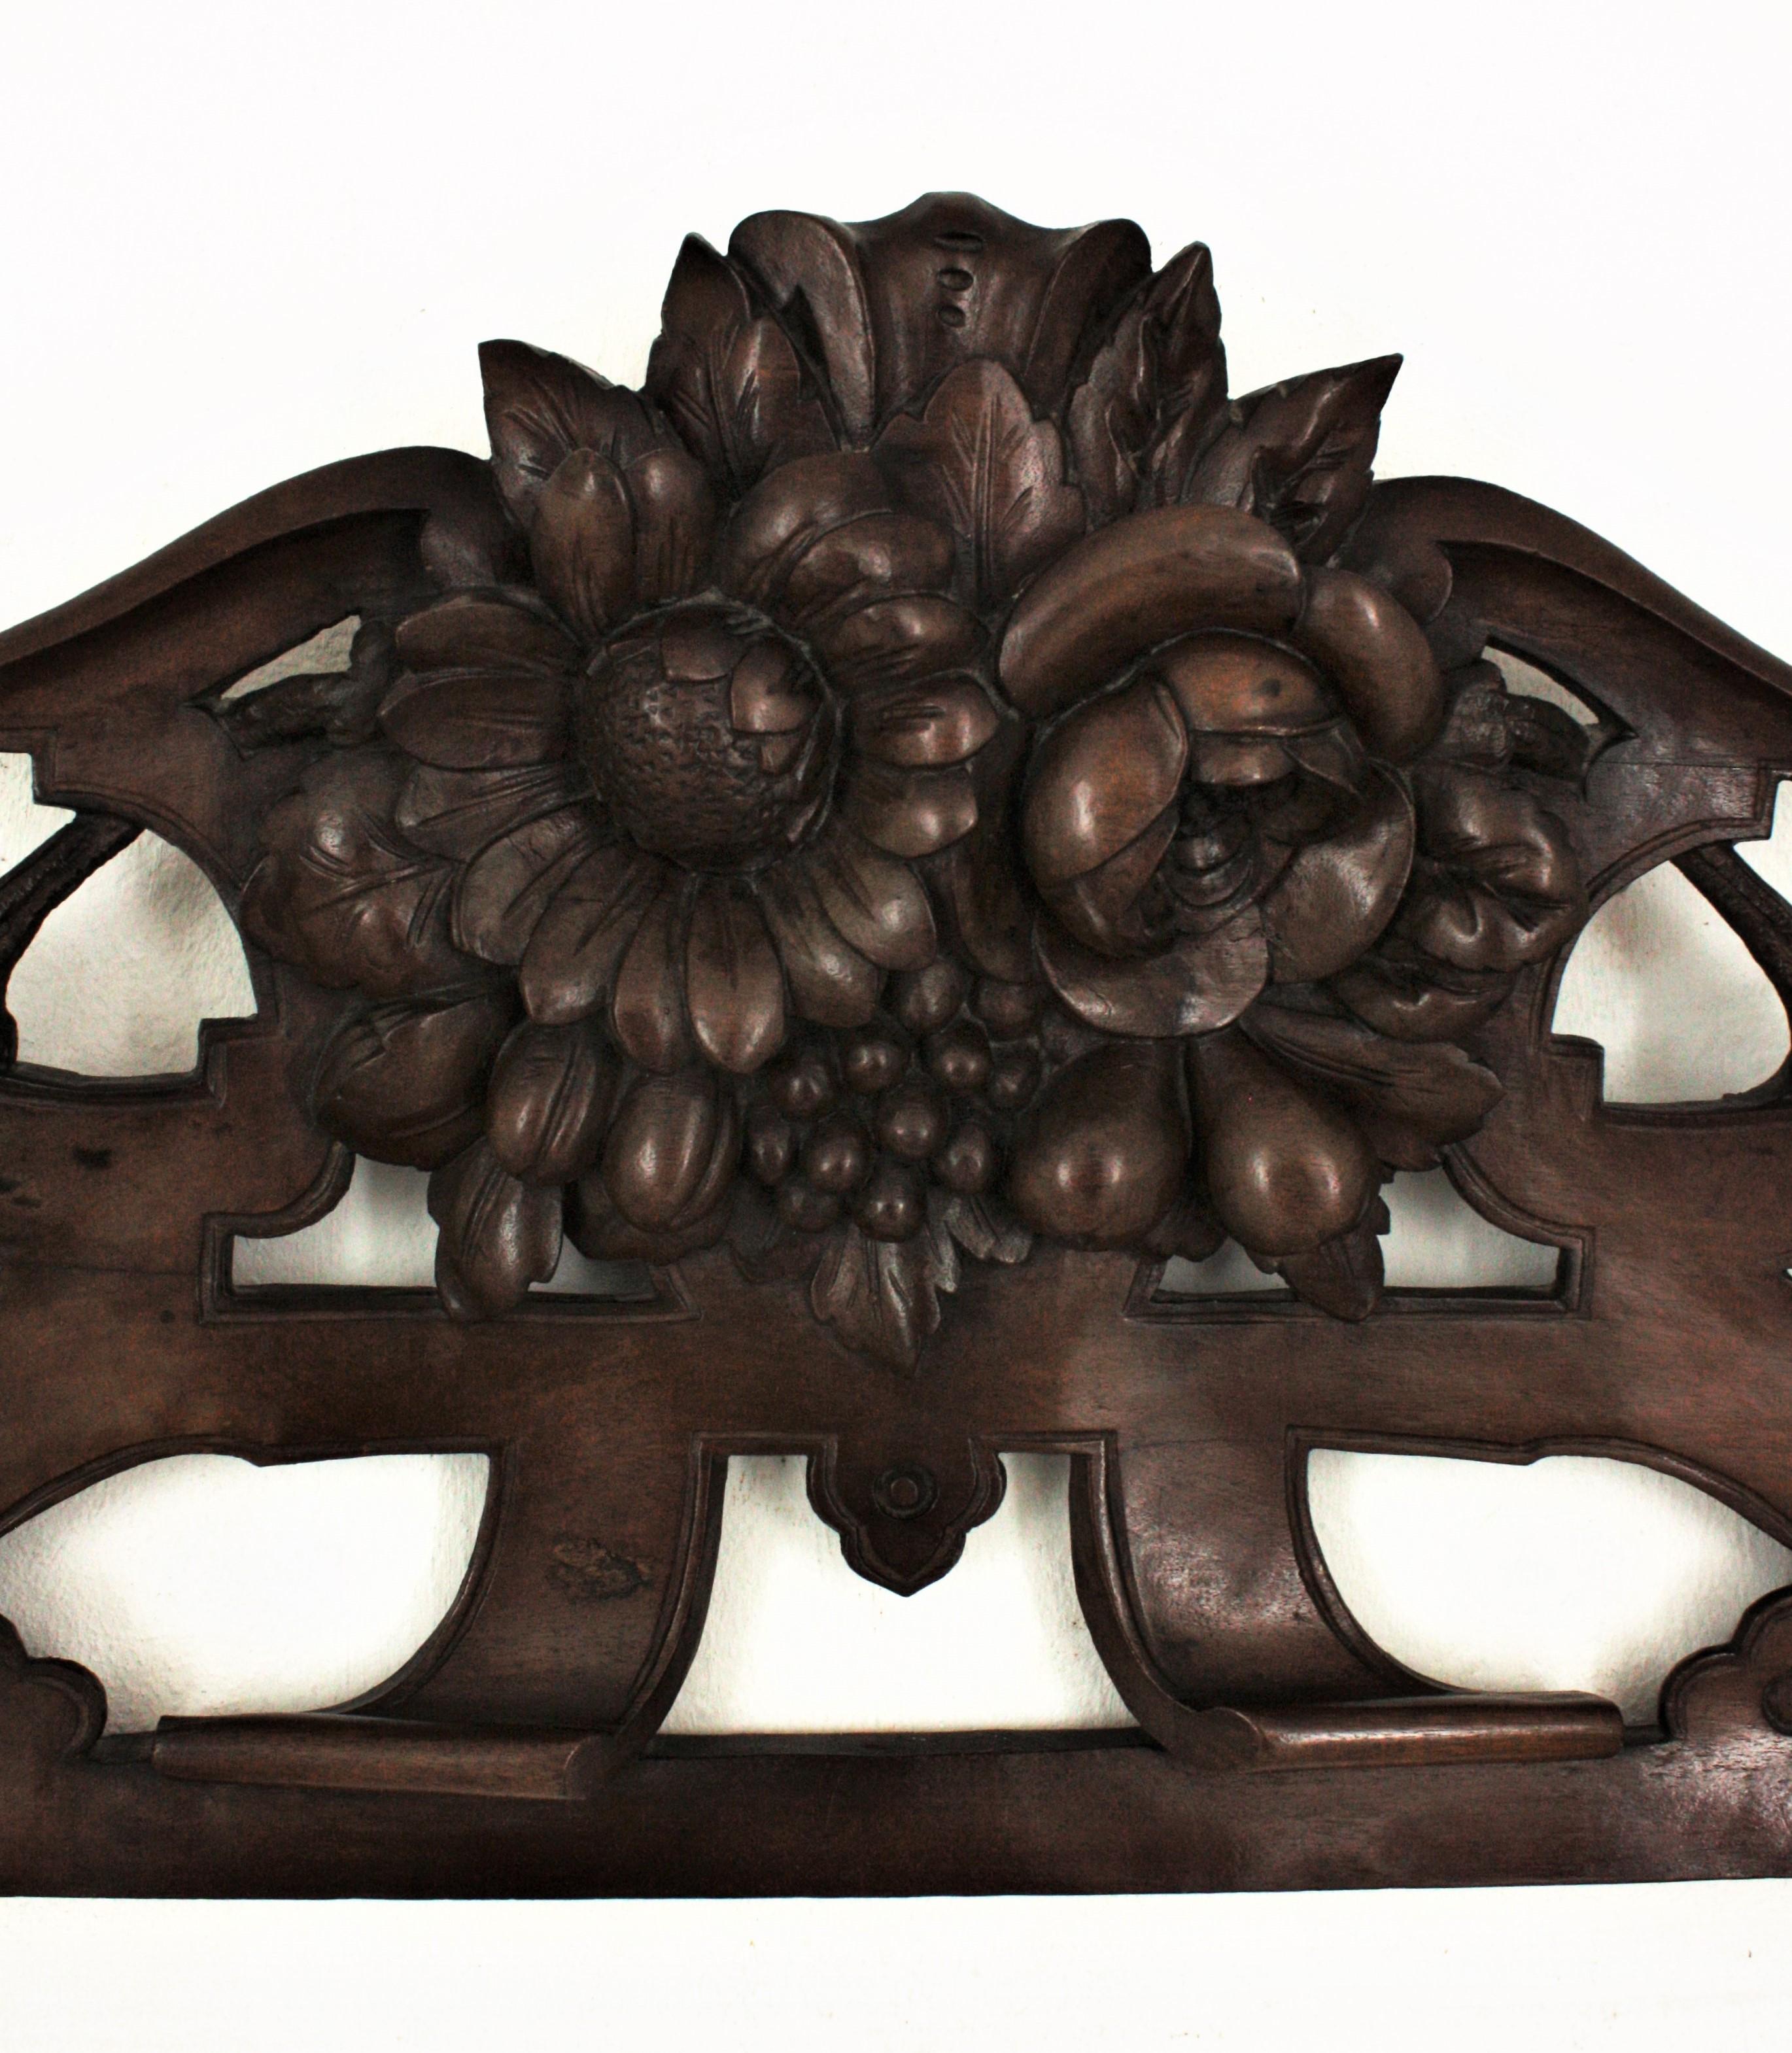 Hand-Carved French 19th Century Black Forest Carved Walnut Fruit and Flower Pediment / Crest